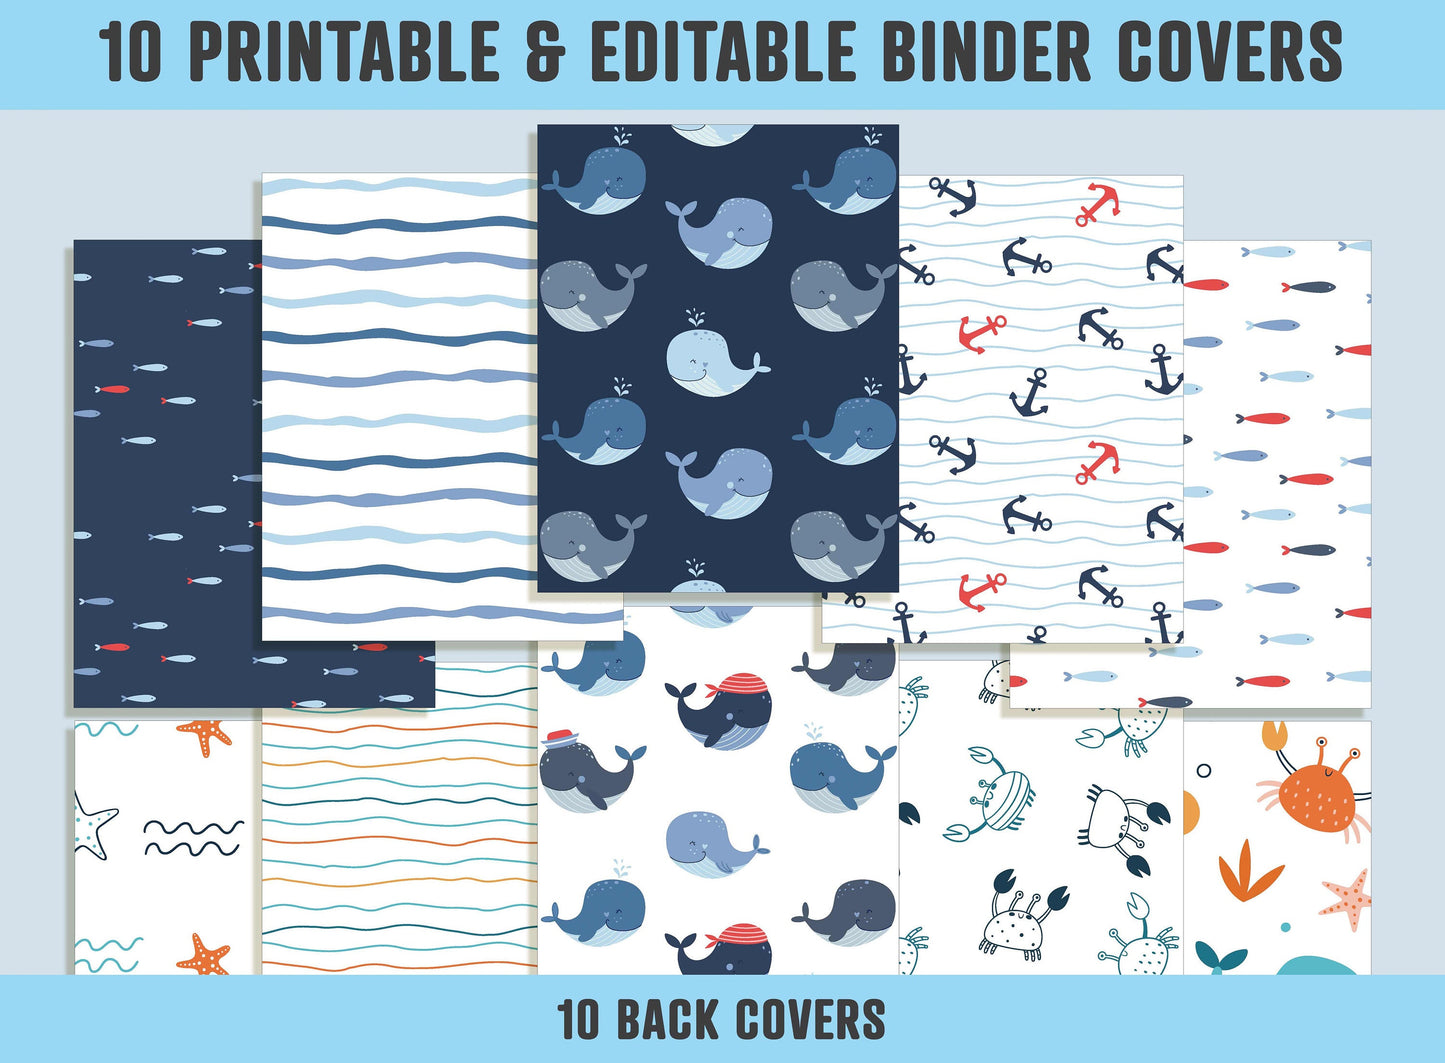 Whales and Waves Binder Cover, 10 Printable/Editable Binder Covers+Spines, Sea Life Planner Template, Teacher/School Binder Label/Insert